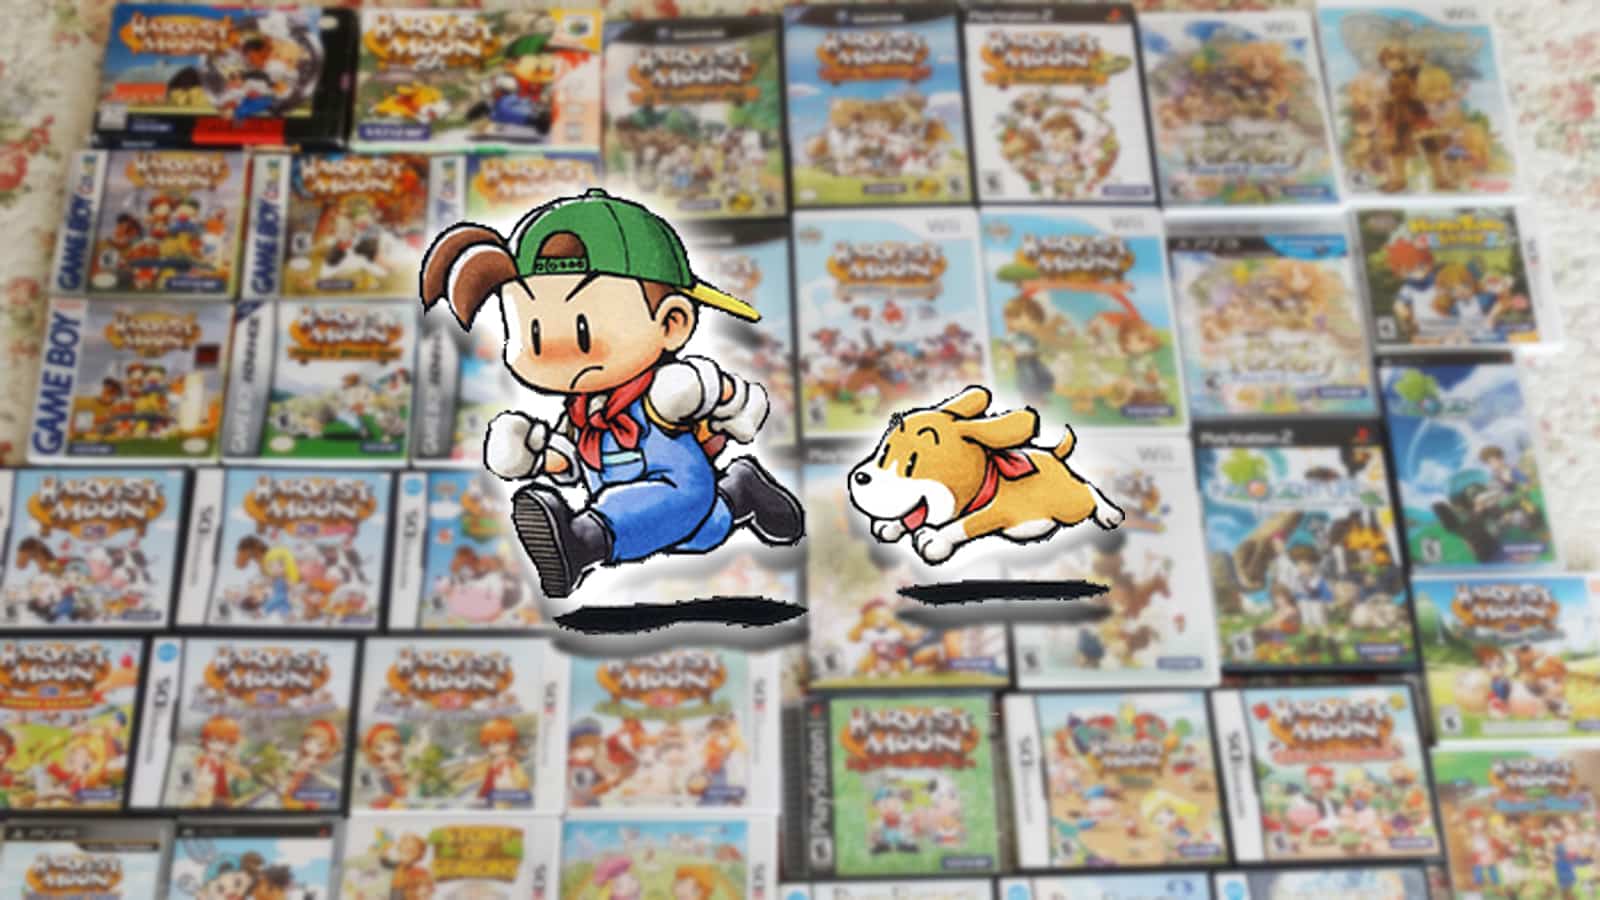 Man goes viral for selling wife's Harvest Moon game collection